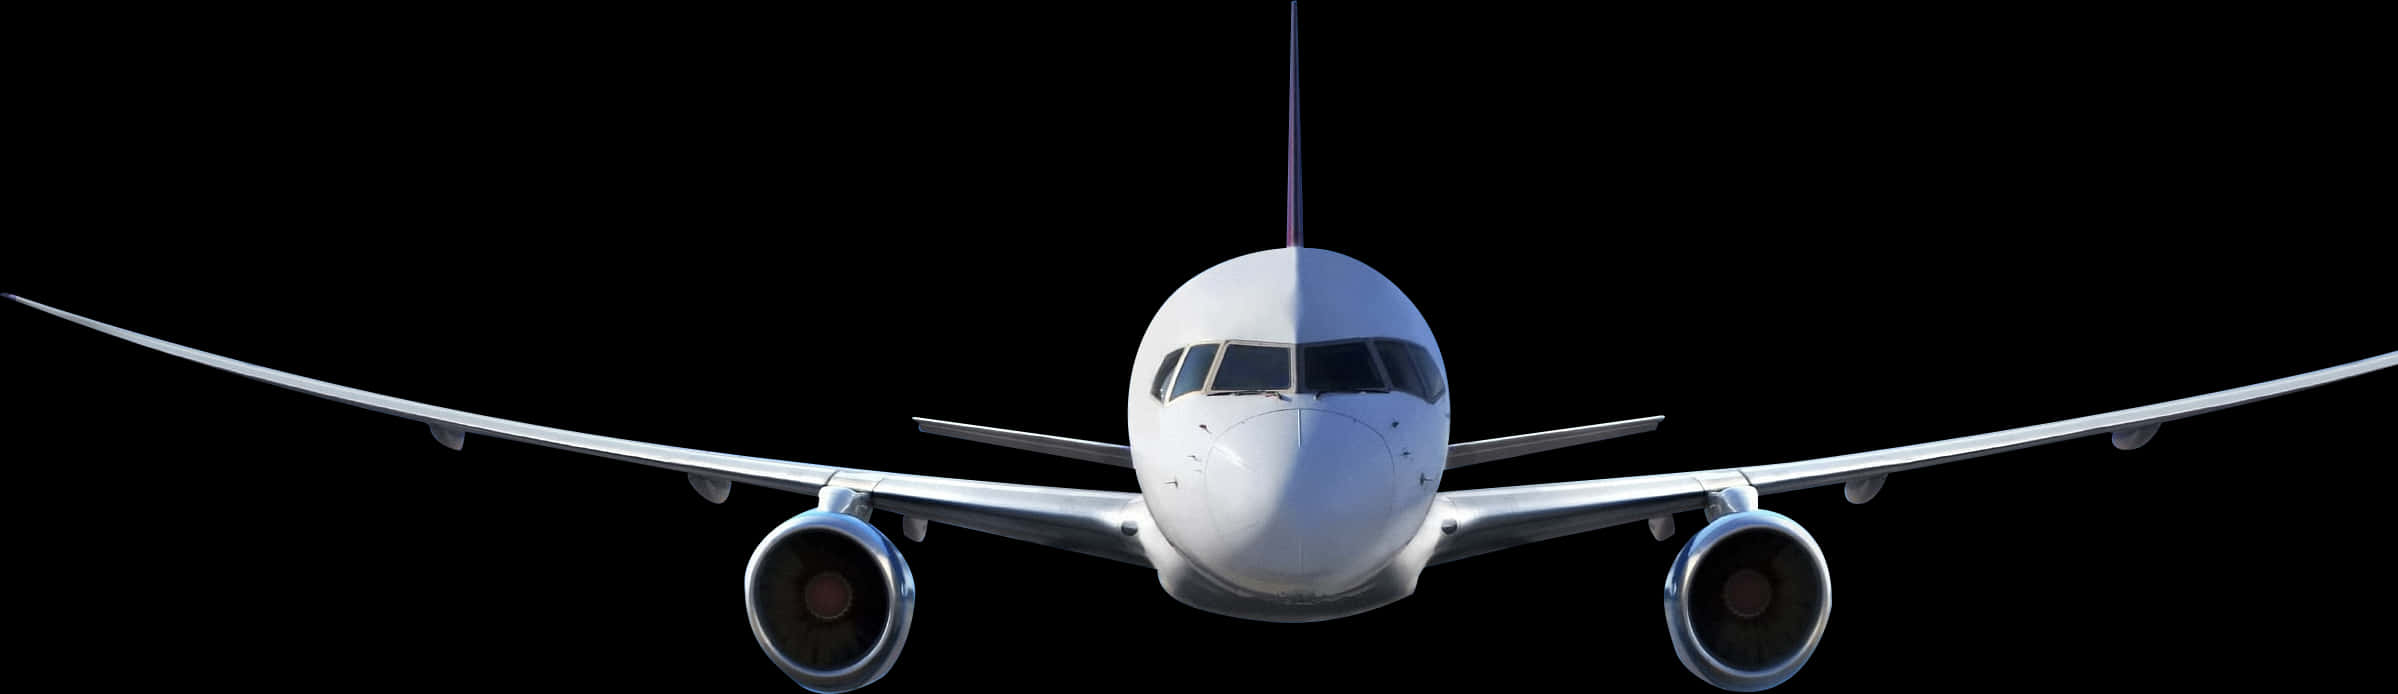 Commercial Airplane Front View Night Sky PNG